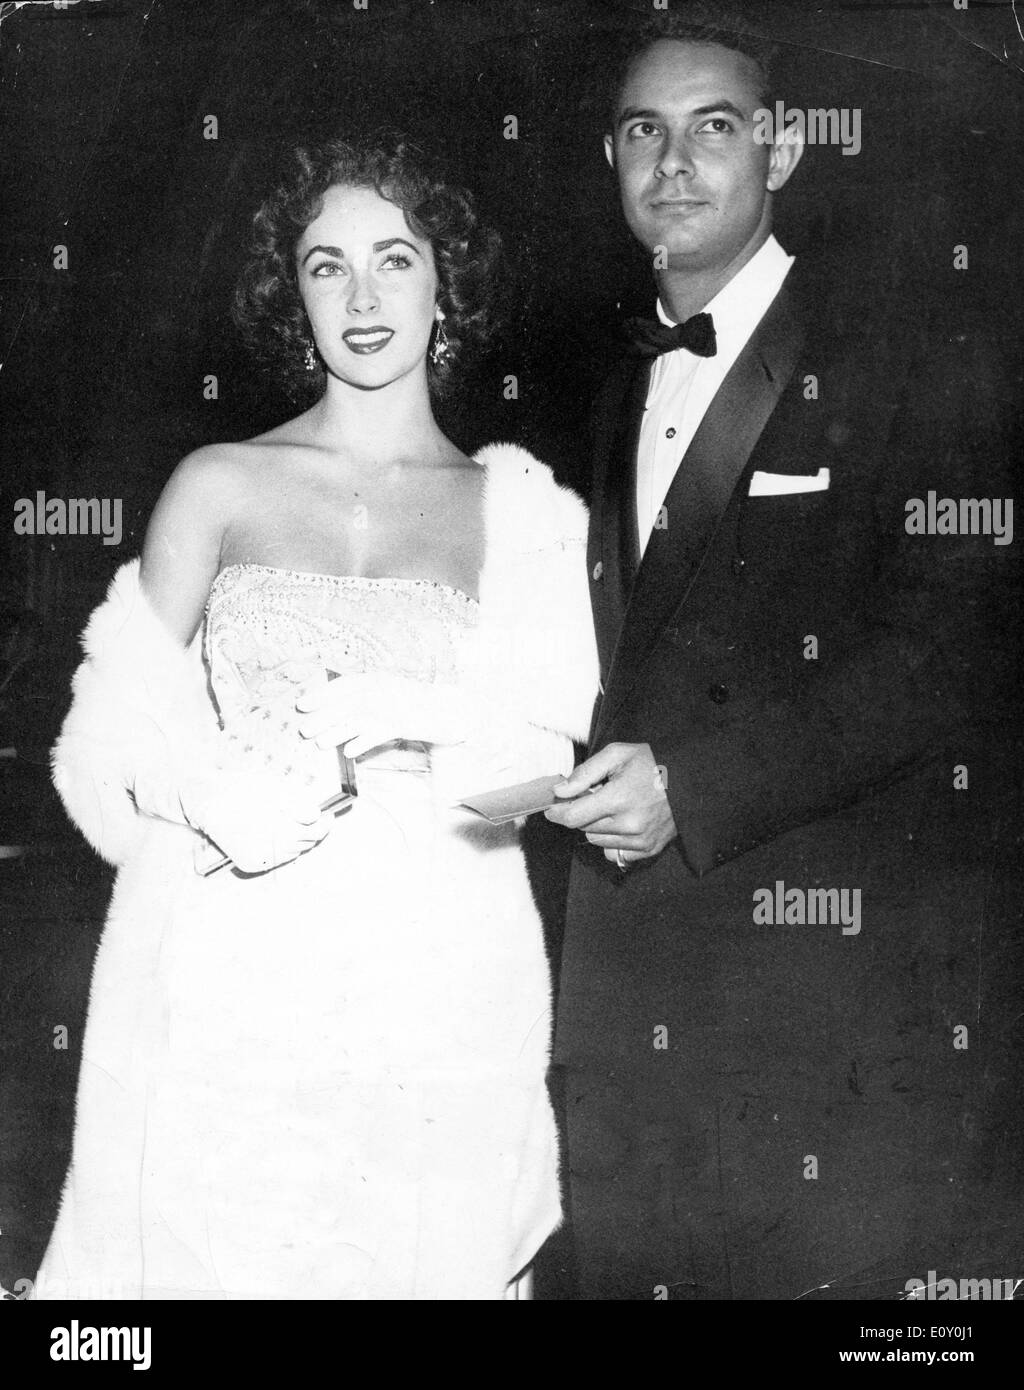 Actress Elizabeth Taylor attends event with escort Stock Photo